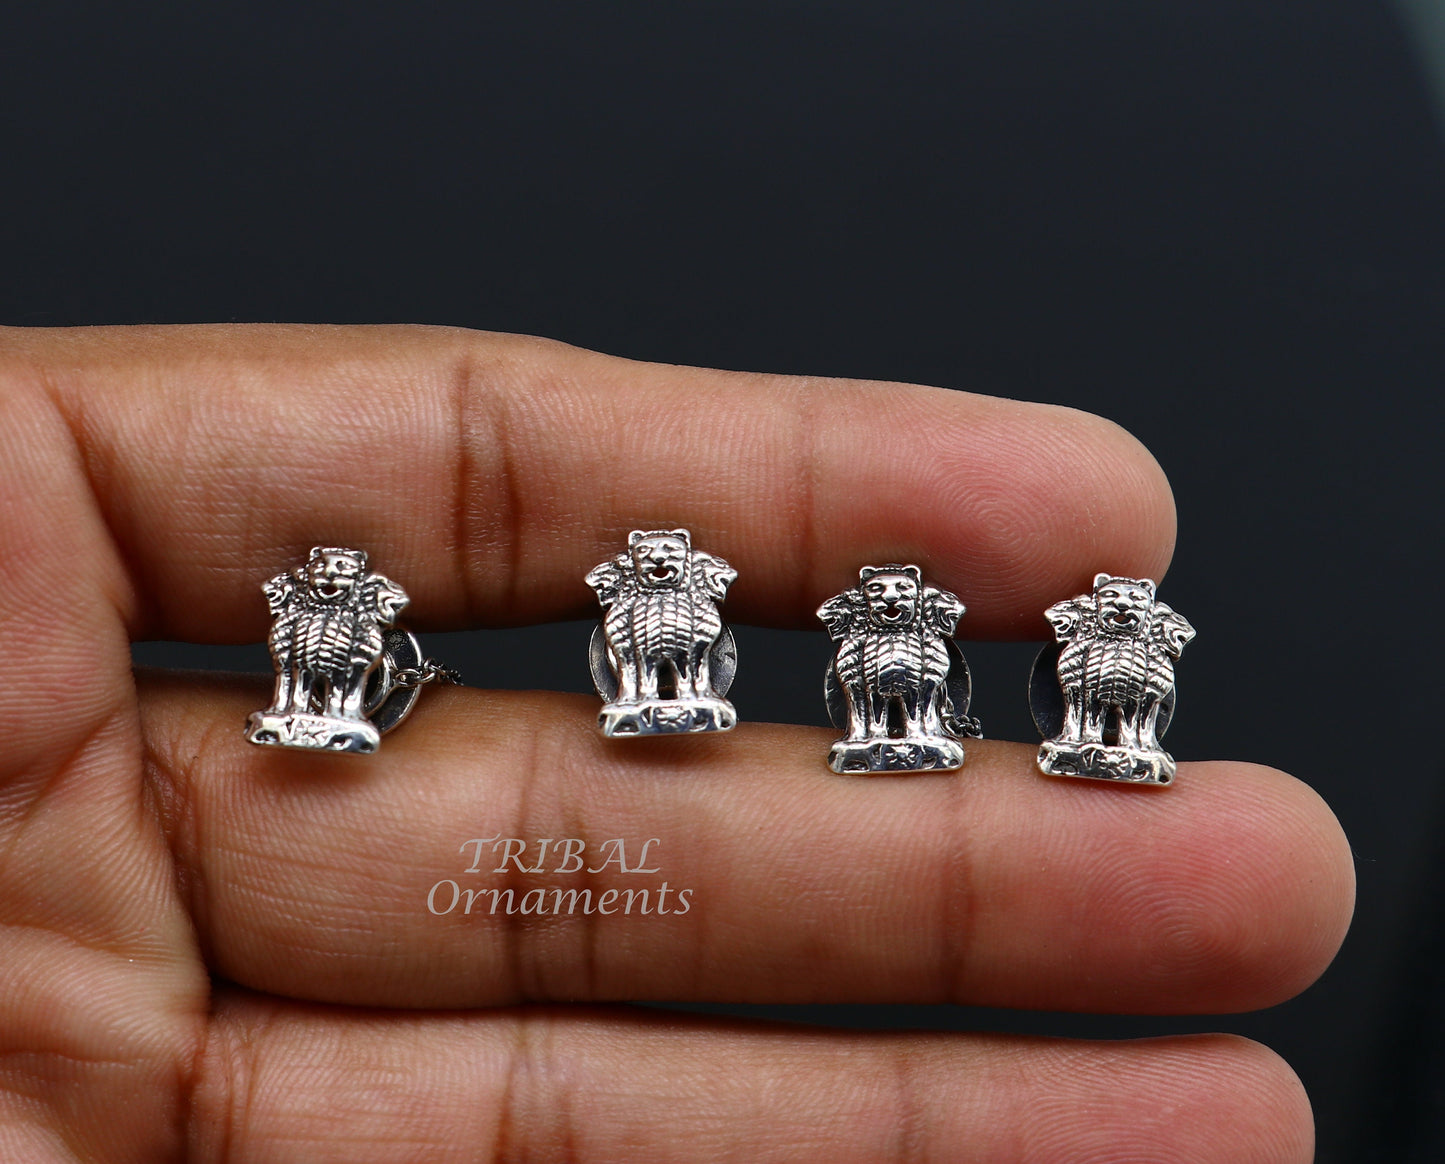 925 Sterling silver handmade amazing Indian national symbol Satyamev Jayate design buttons for men's kurta, best gifting accessories btn09 - TRIBAL ORNAMENTS